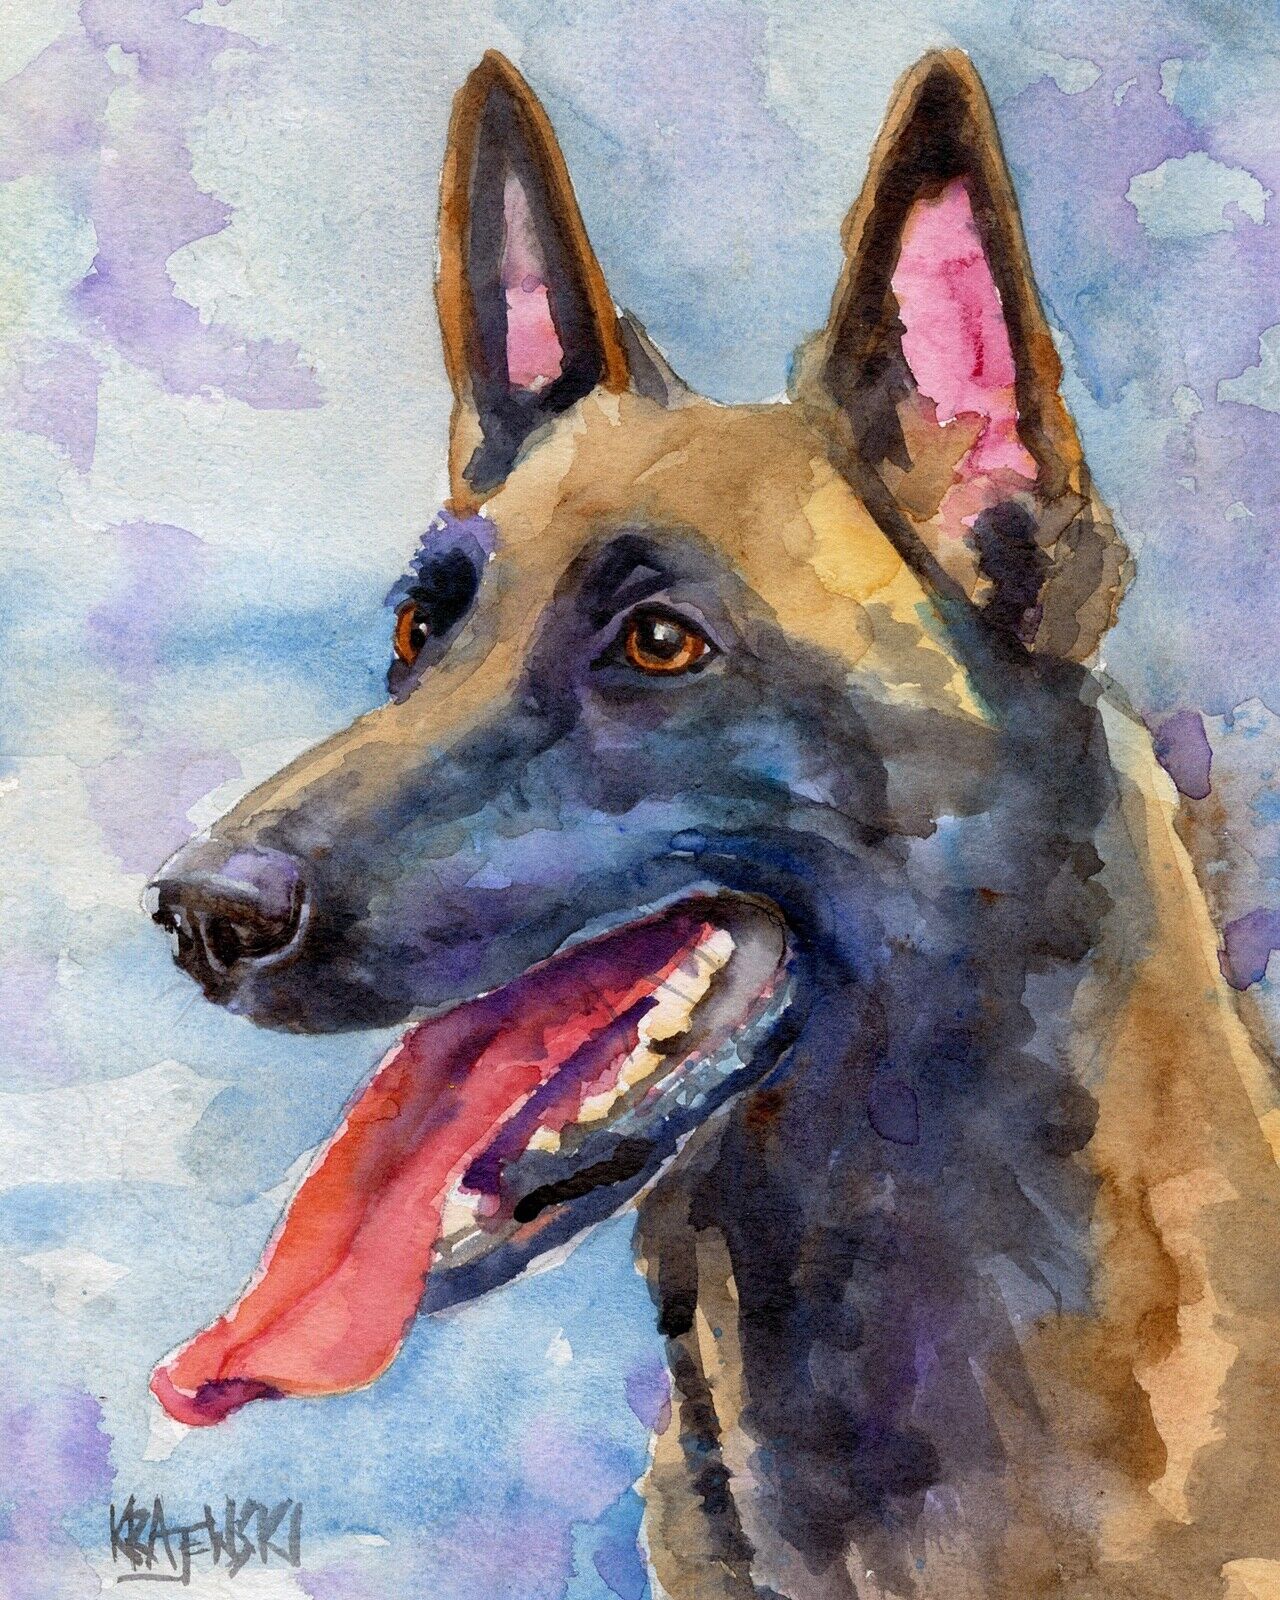 Belgian Malinois Art Print from Painting | Gifts, Poster, Home Decor 8x10